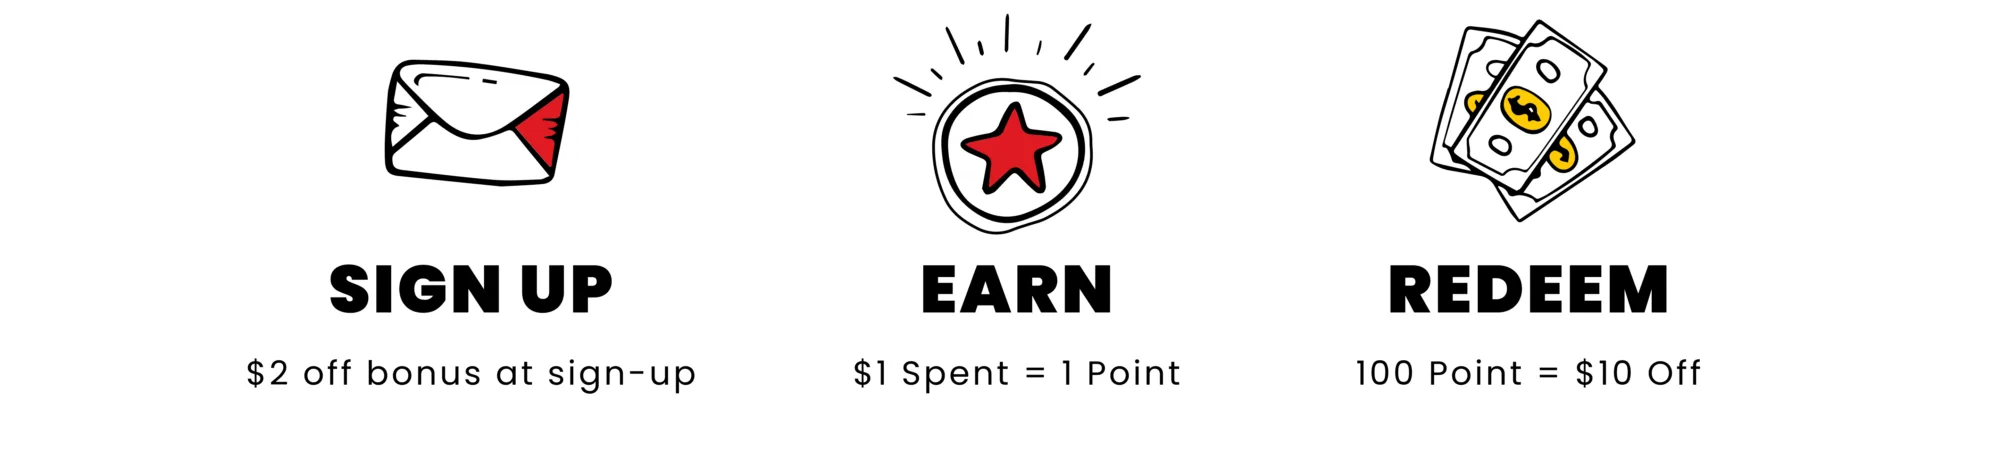 sign up and get $2 off bonus, earn $1 spent equals 1 point, redeem 100 points equals $10 off